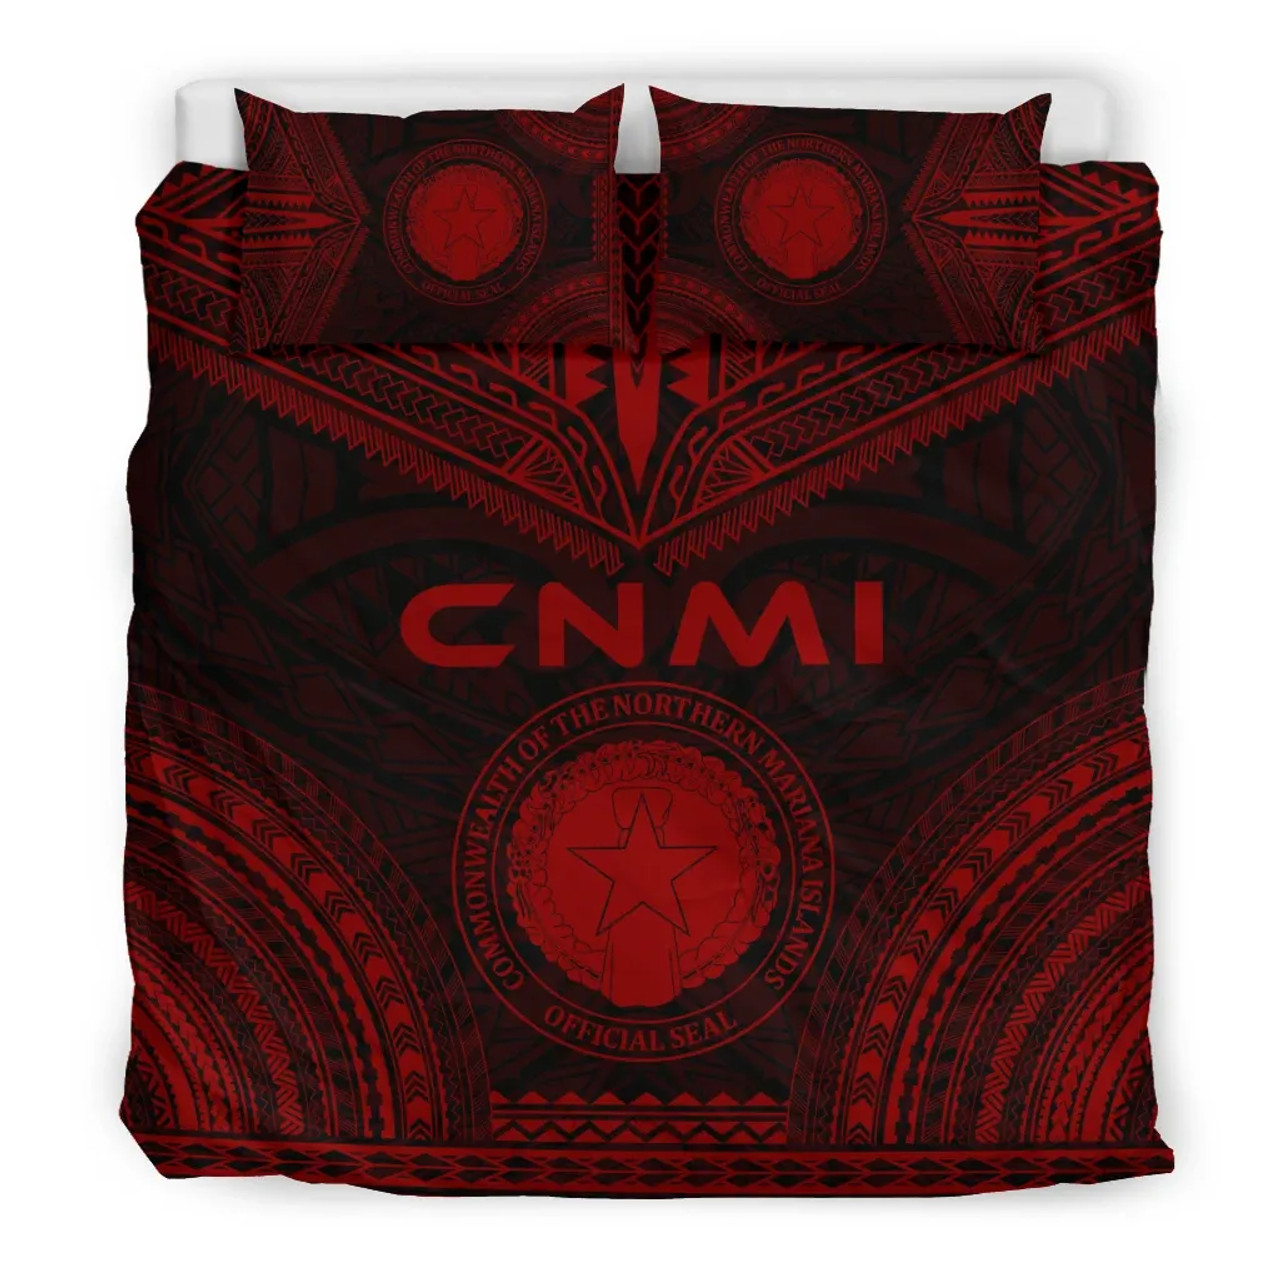 Northern Mariana Islands Polynesian Chief Duvet Cover Set - Red Version 3